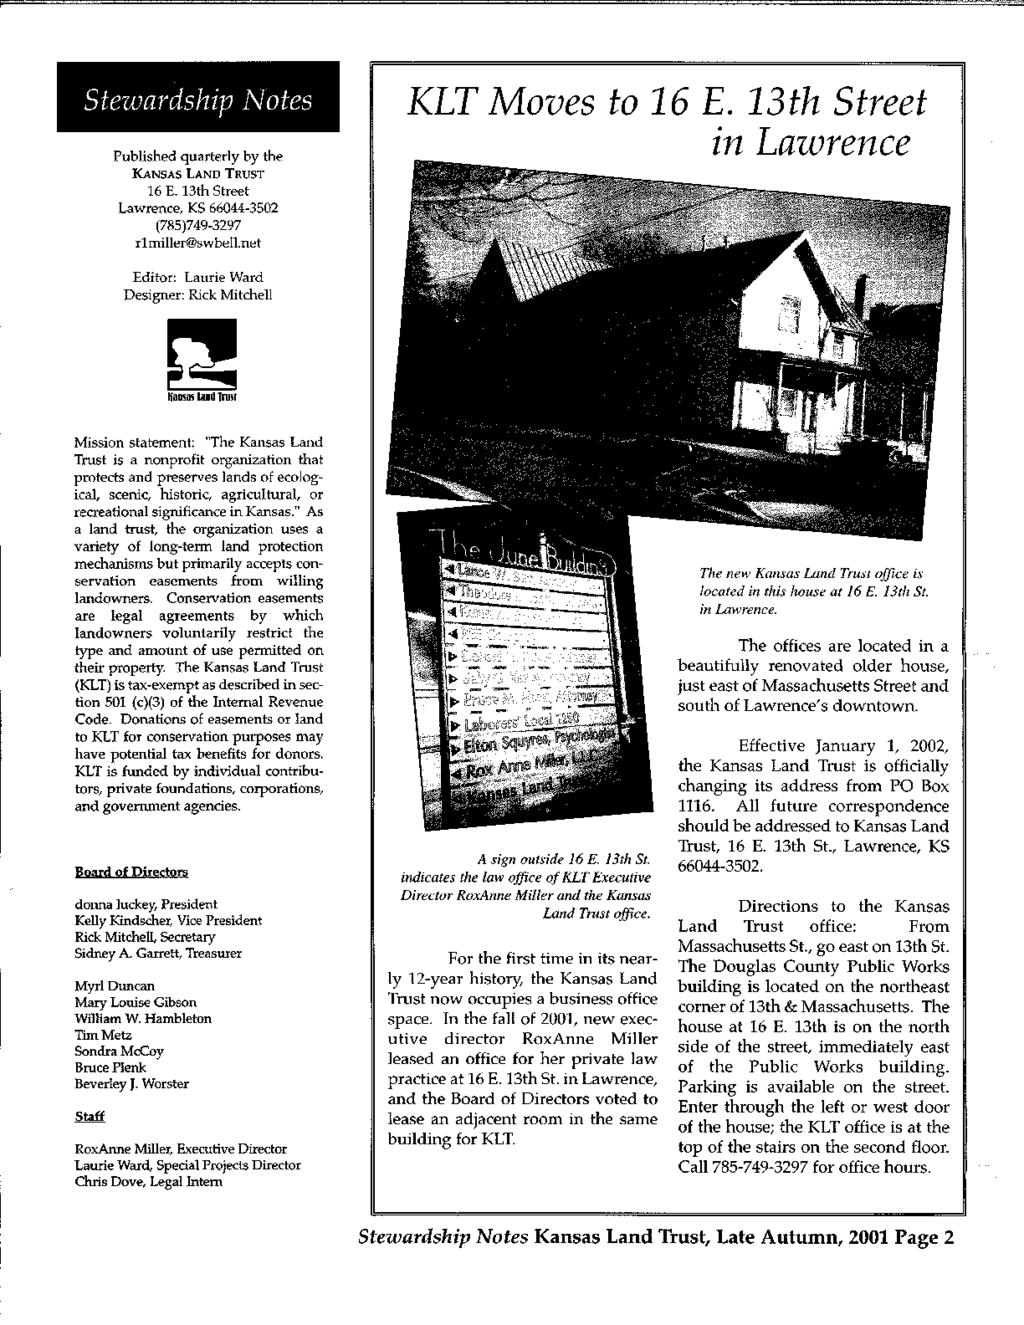 =. Published quarterly by the KANSAS LAND TRUST 16 E. 13th Street Lawrence, KS 66044-3502 (785)749-3297 r1miller@swbell.net Editor: Laurie Ward Designer: Rick Mitchell KLT Moves to 16 E.